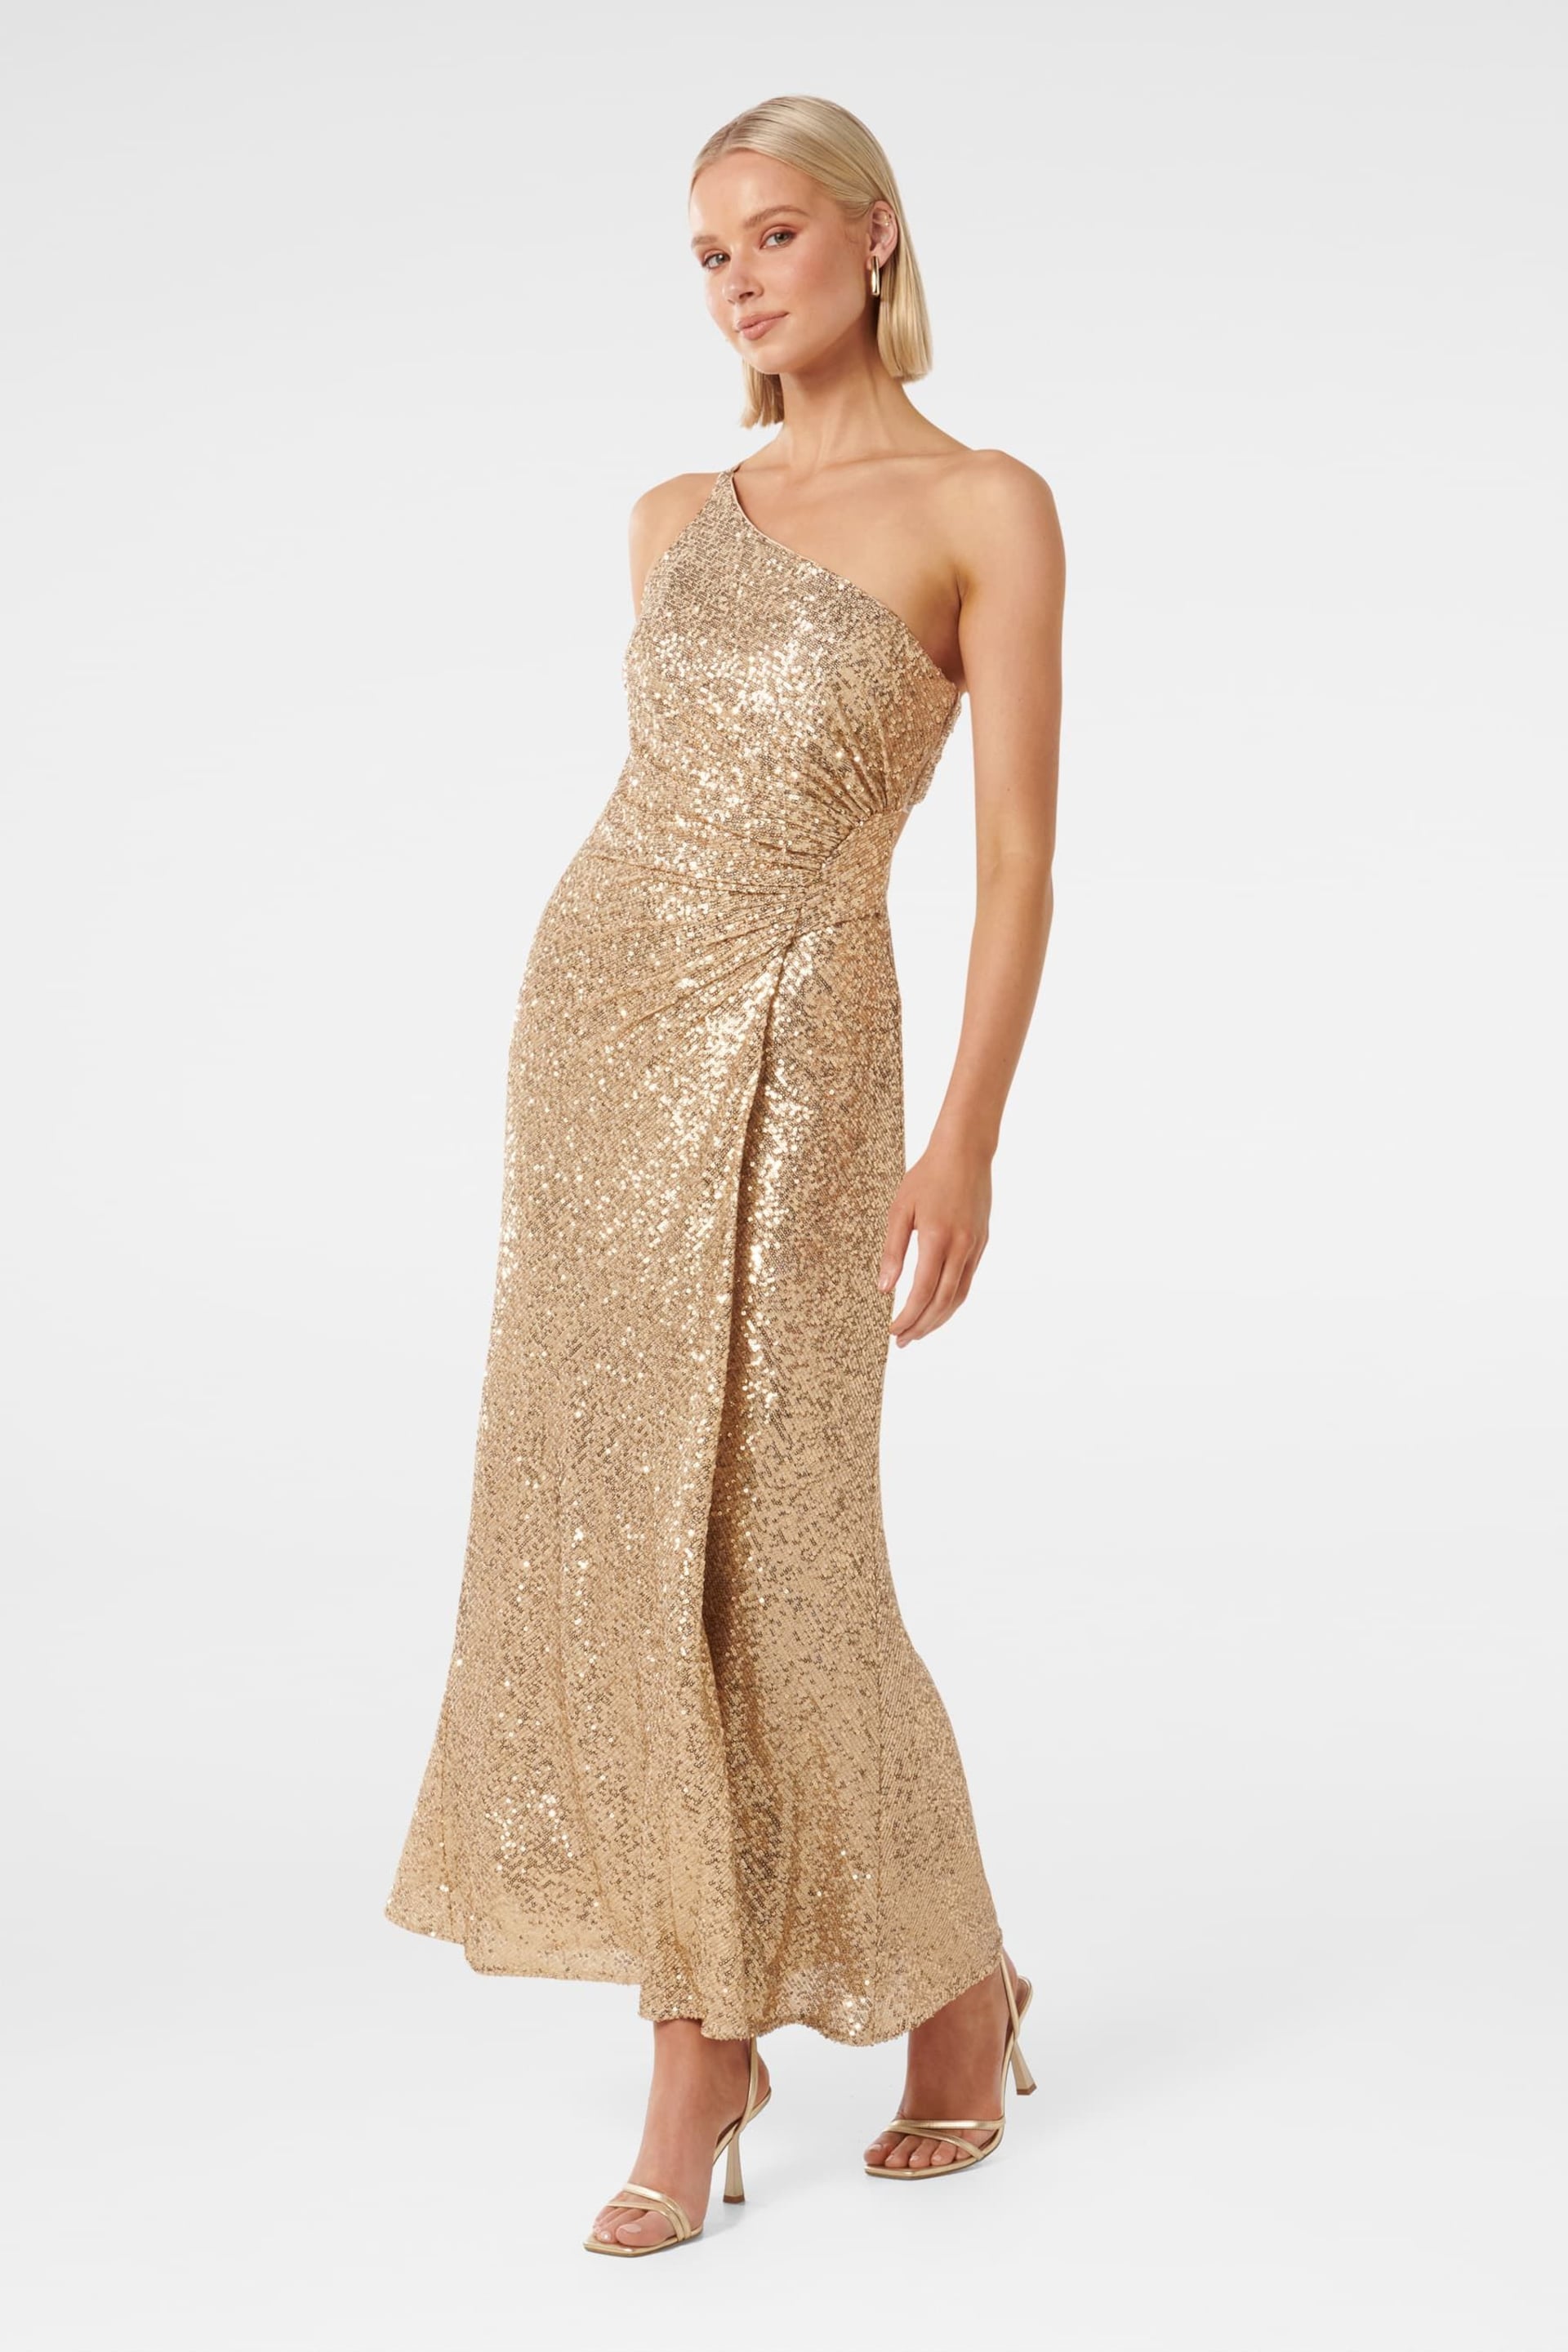 Forever New Gold Carolyn Sequin Asymmetrical Gown - Image 3 of 4